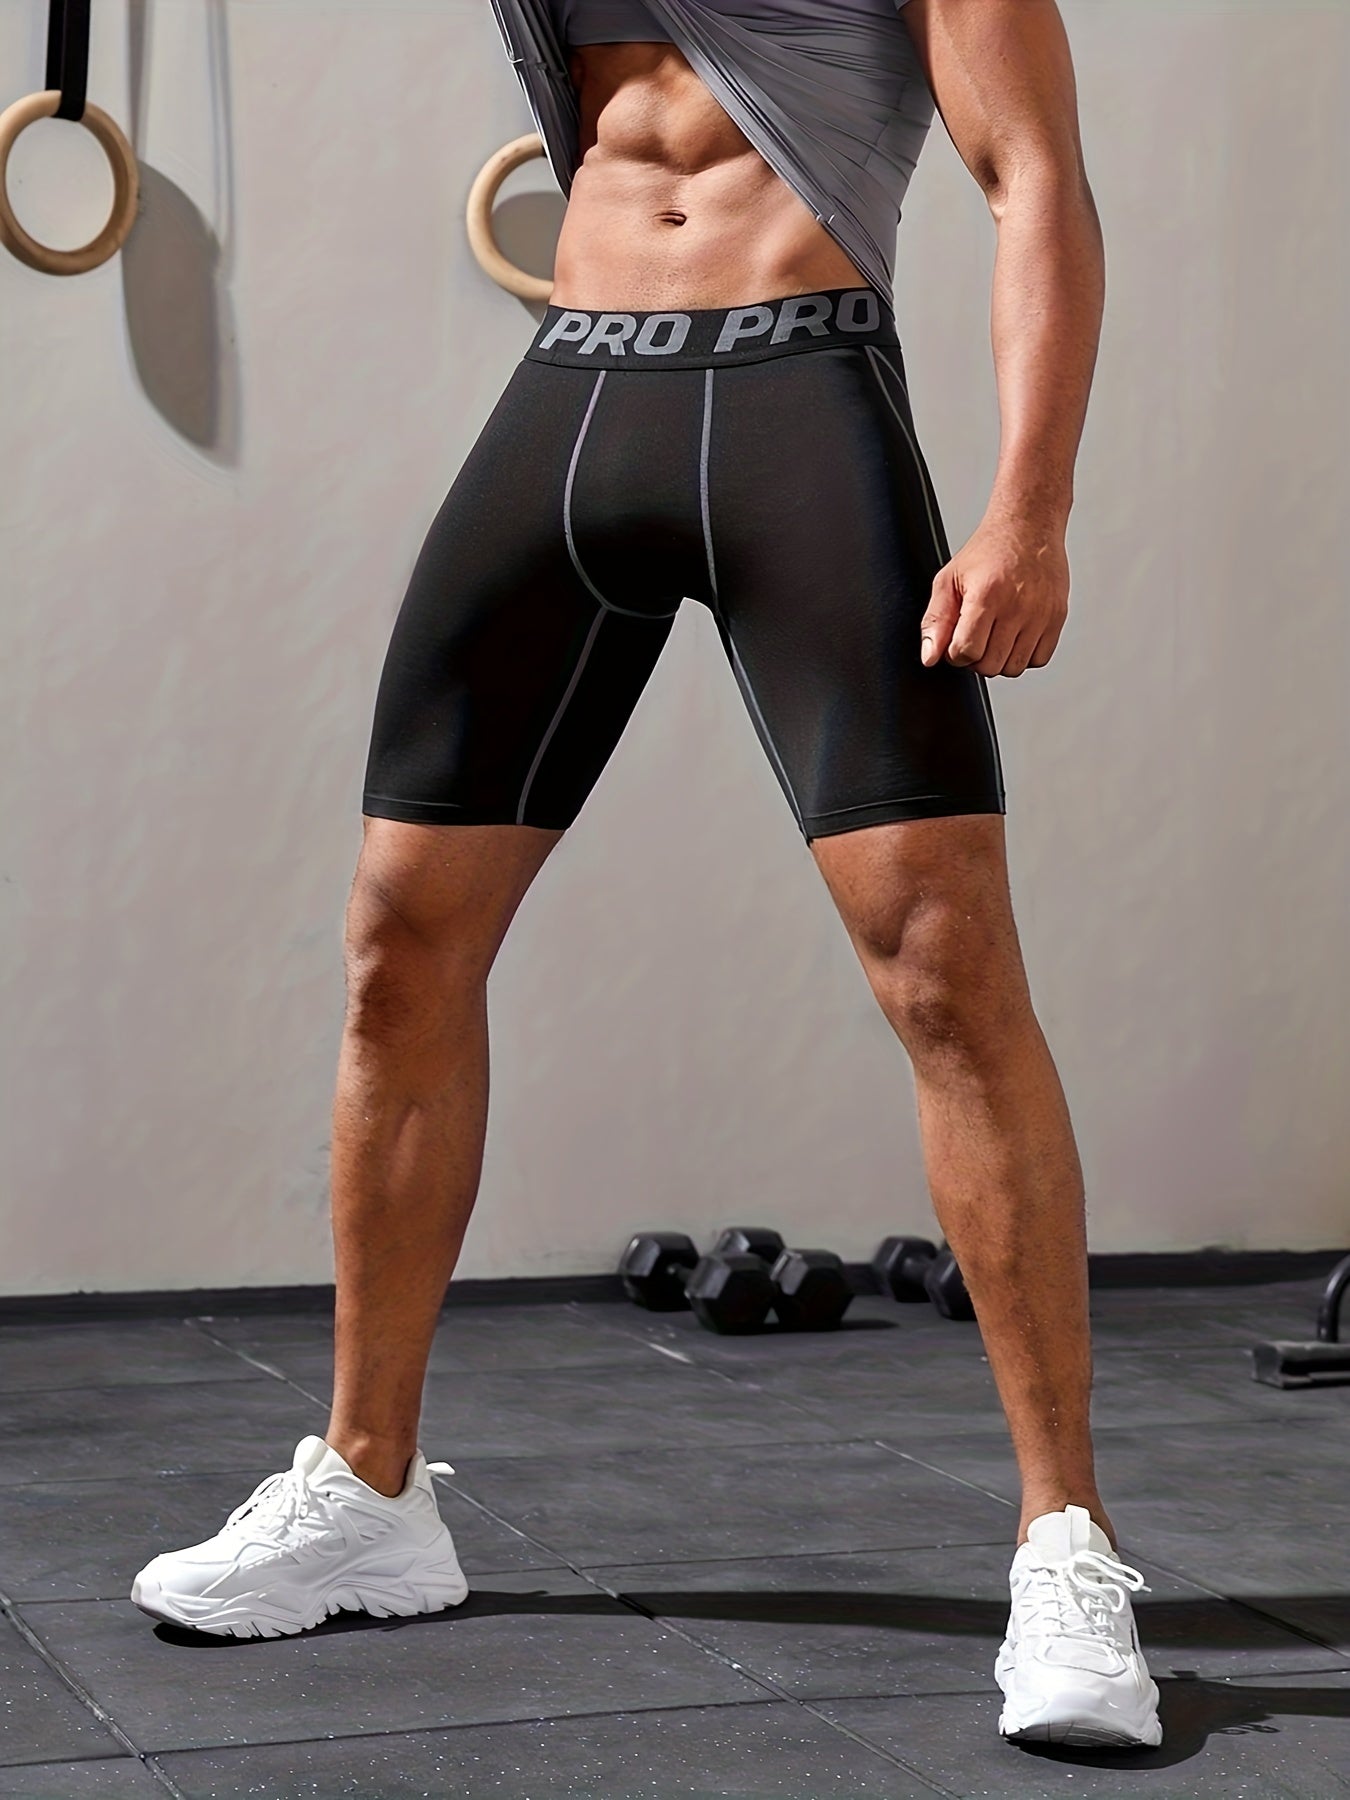 Men's Stretch Sports Pants Activewear, High Stretch Lightweight Quick Dry Athletic Shorts For Gym Fitness Workout